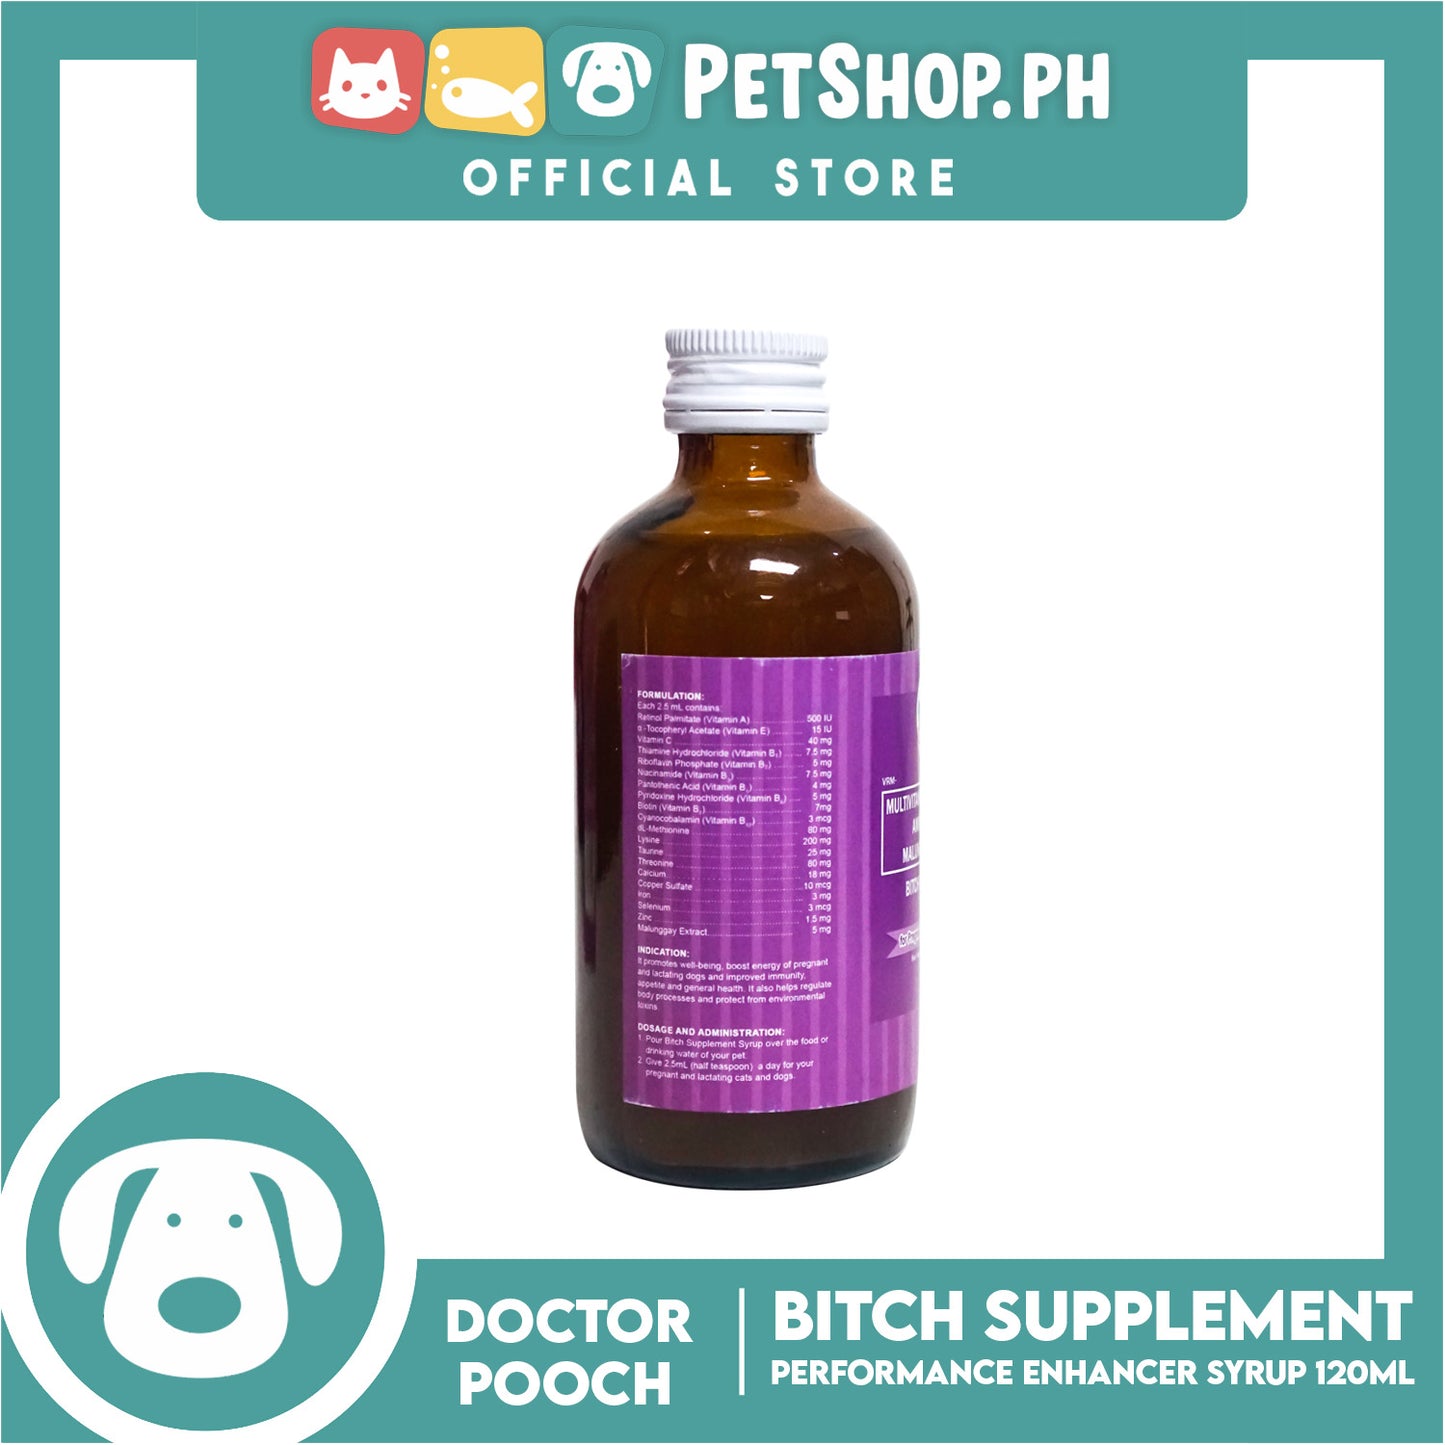 Doctor Pooch Bitch Supplement, Multivitamins Mineral Amino Acids And Malunggay Extract 120ml